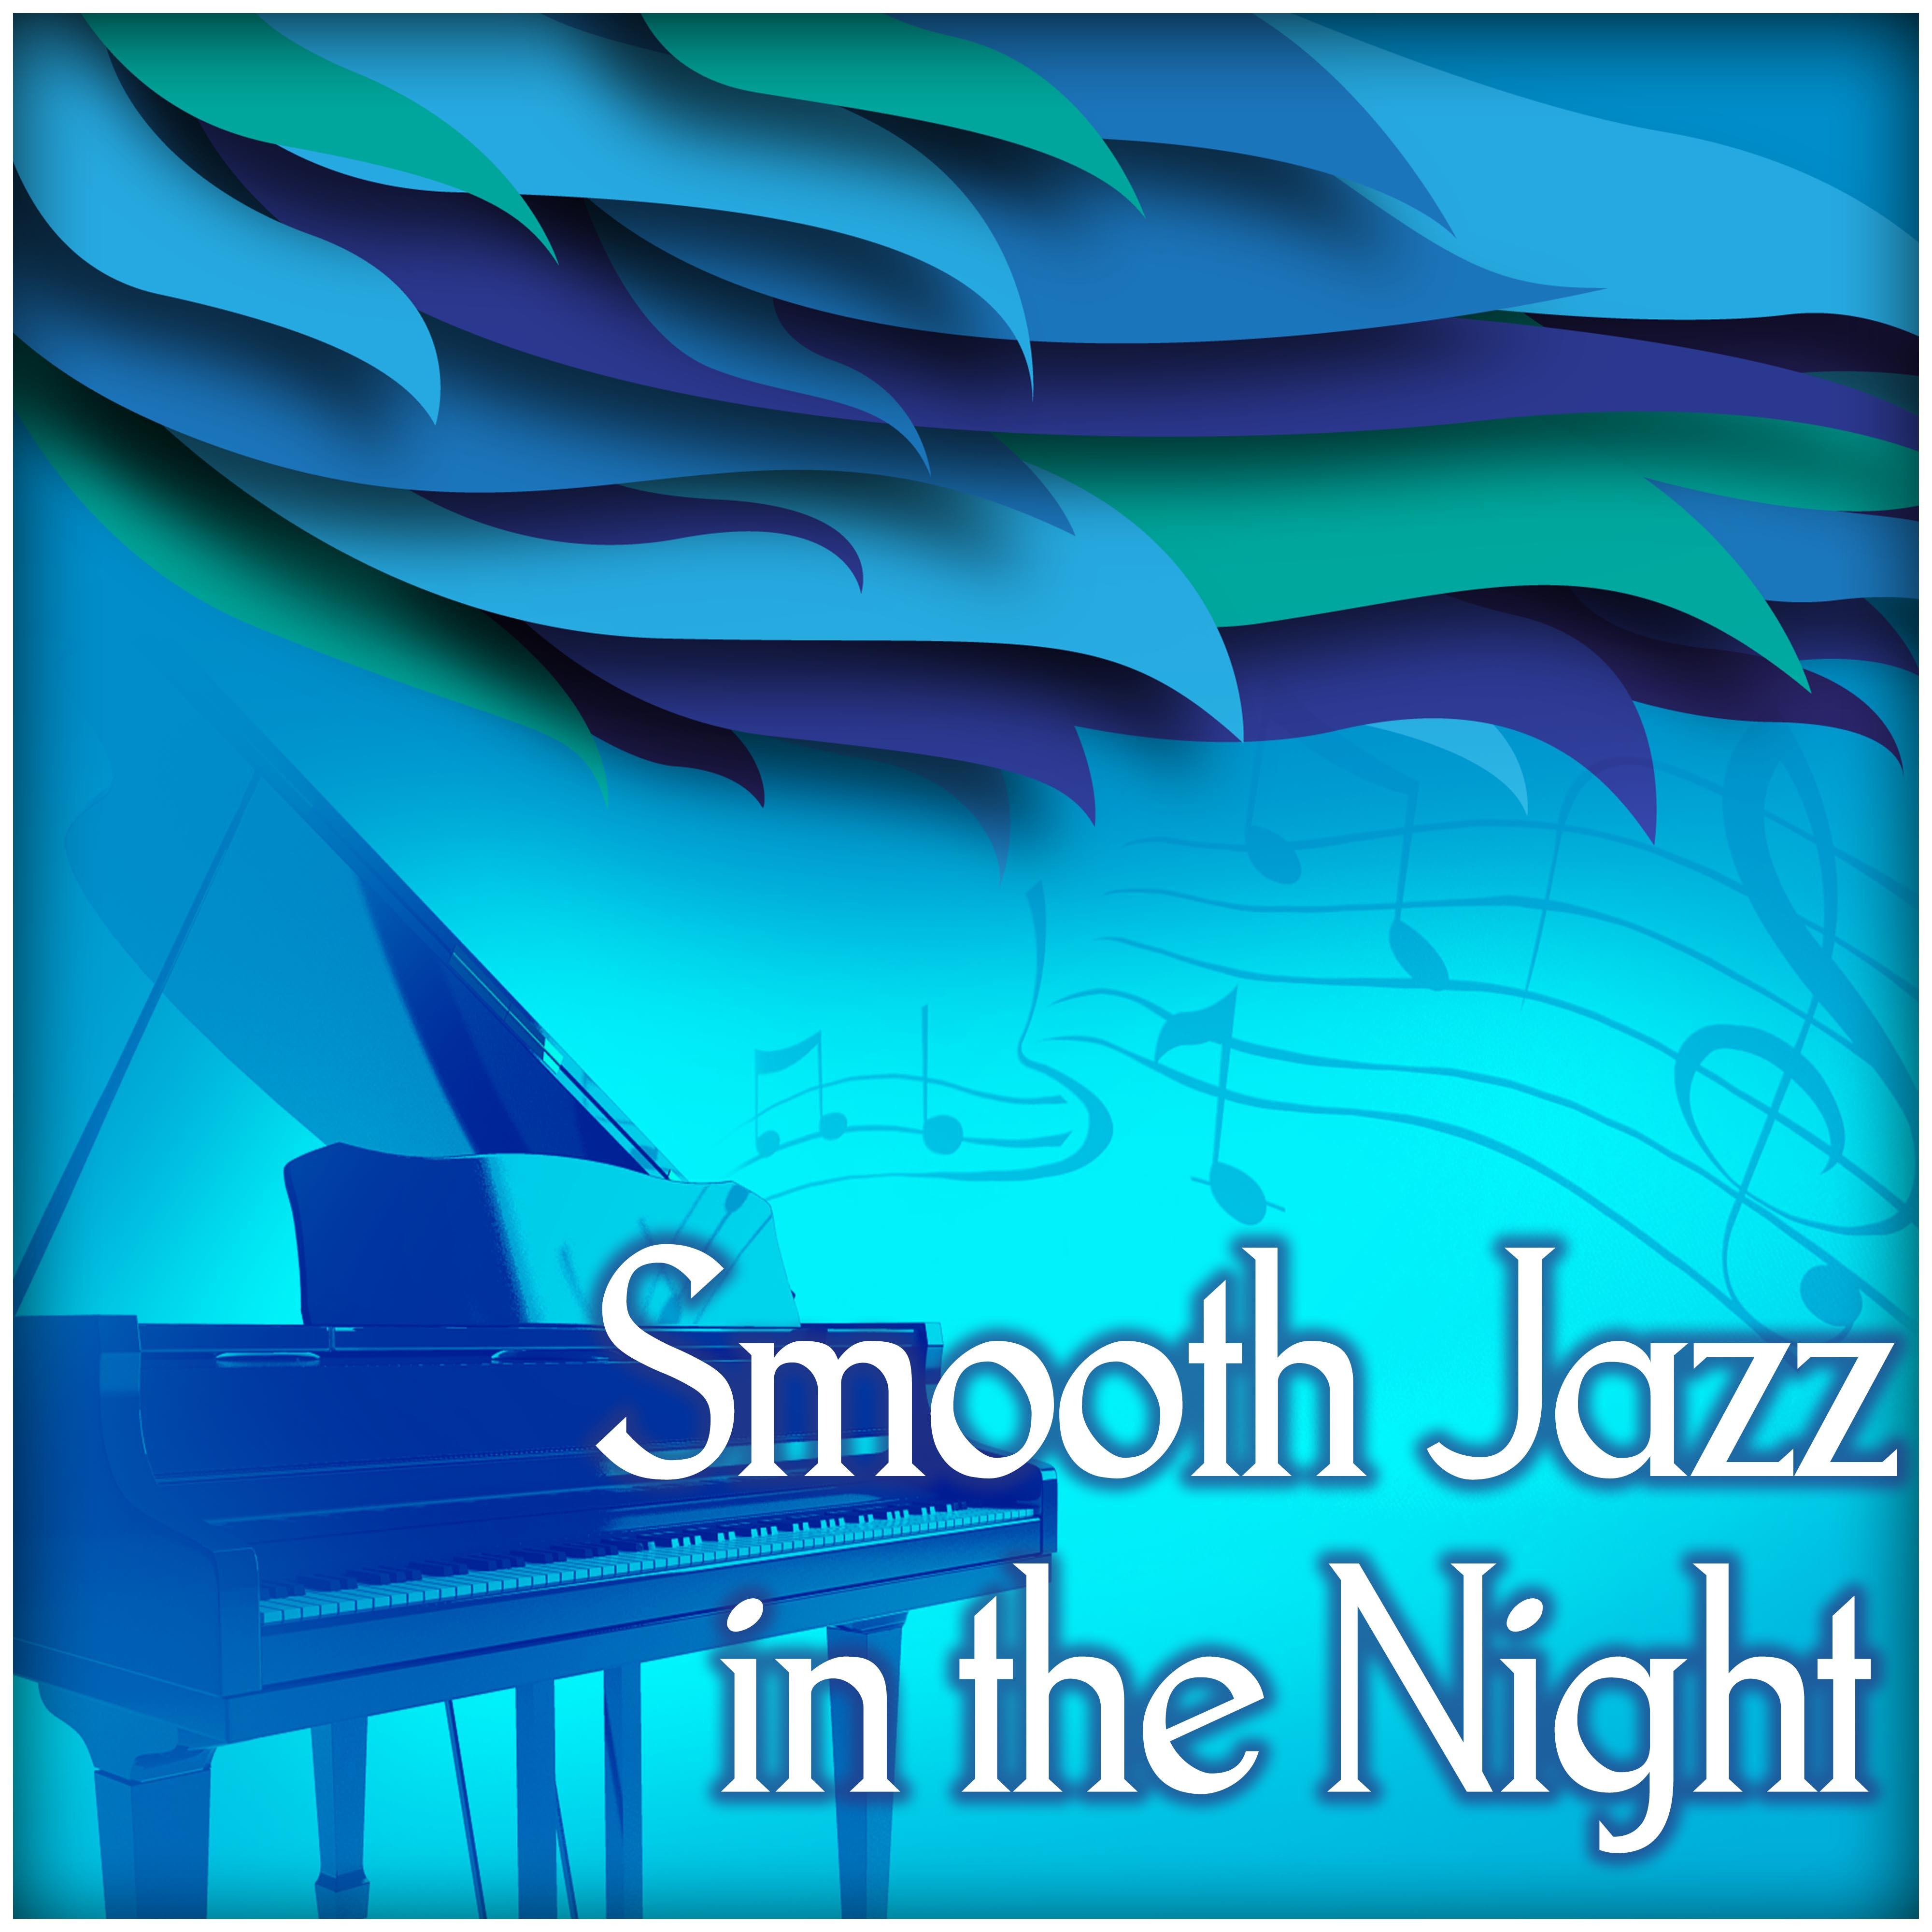 Smooth Jazz in the Night – Soft & Calm Piano Jazz, Blue Jazz, Easy Listening, Background Piano Music